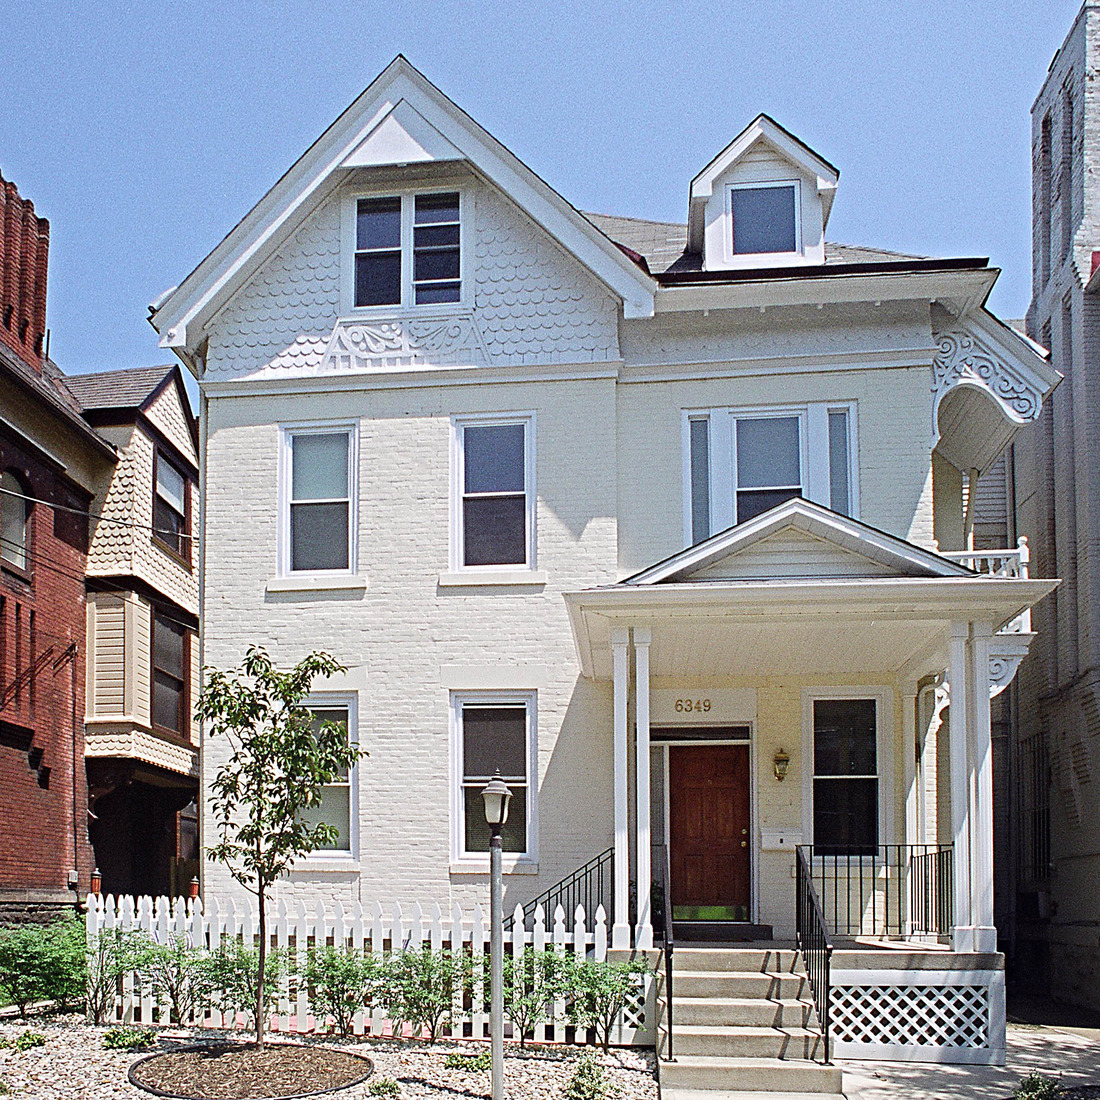 exterior of 6349 Marchand Street